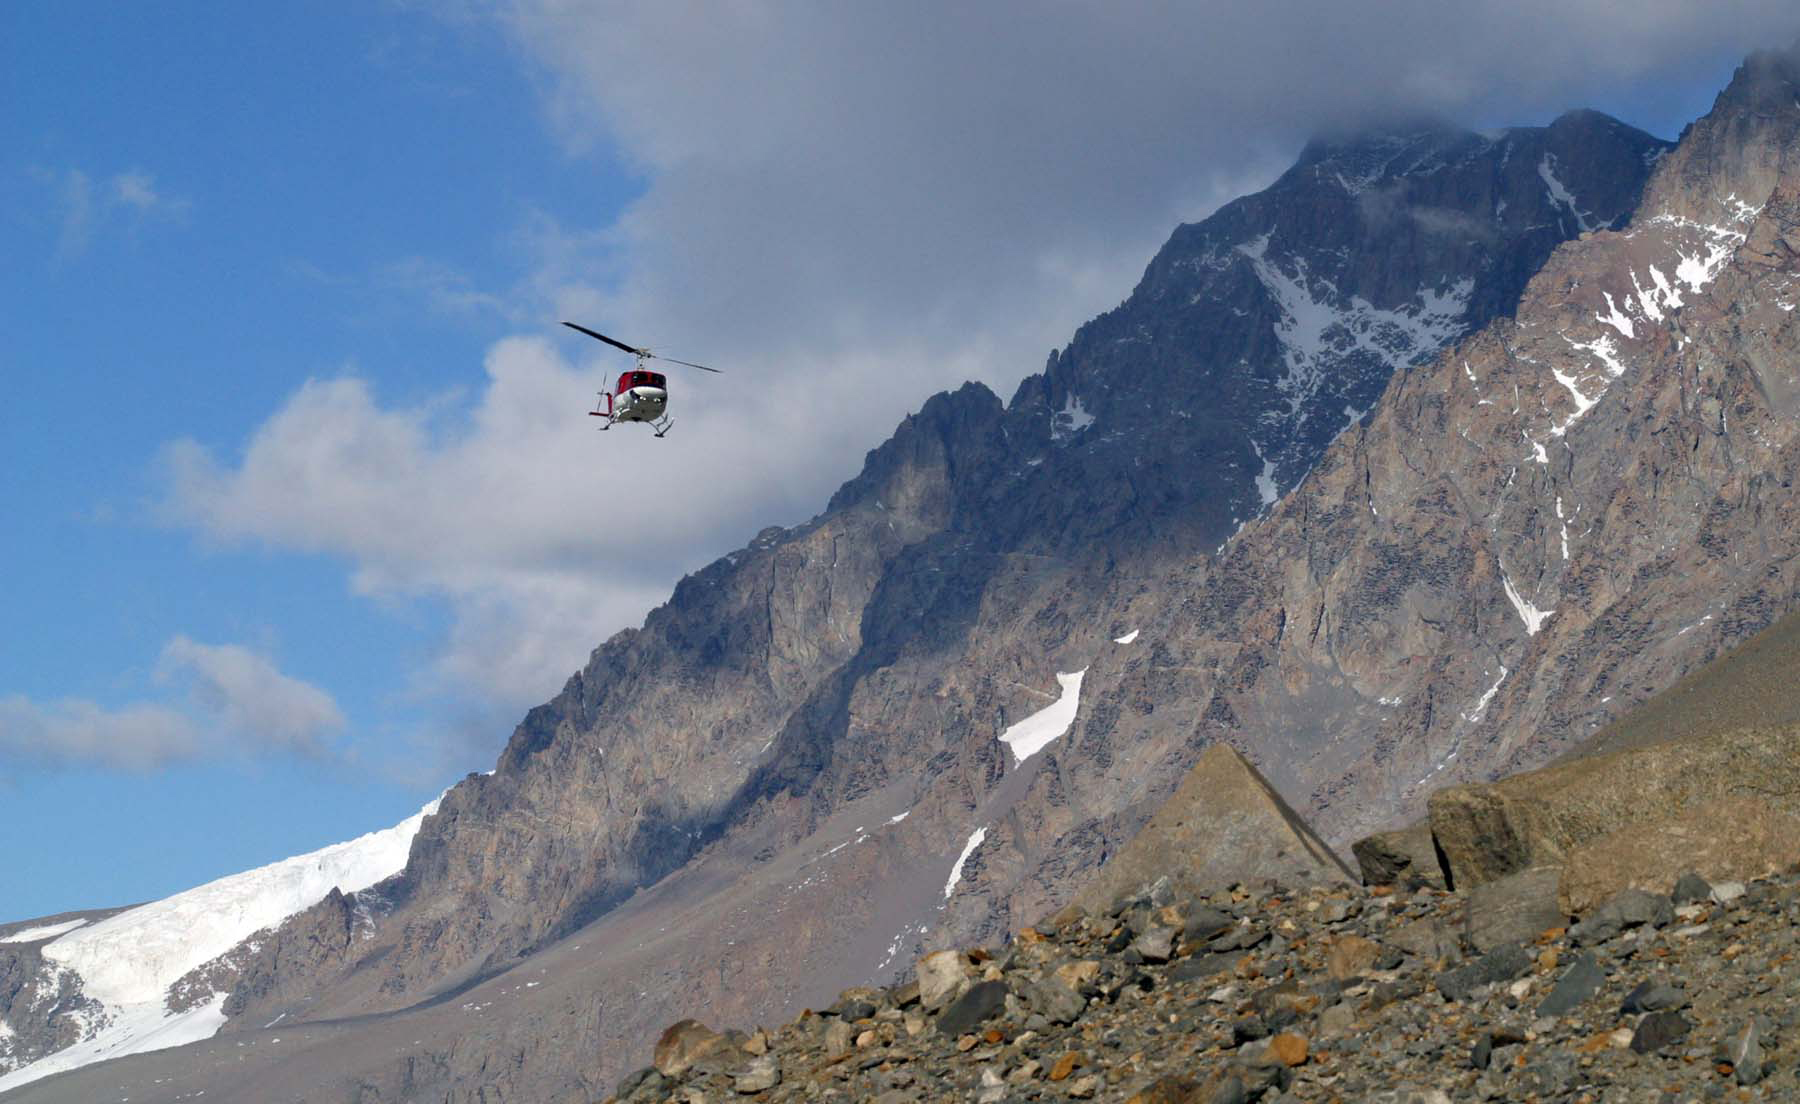 A helicopter flies near mountains.